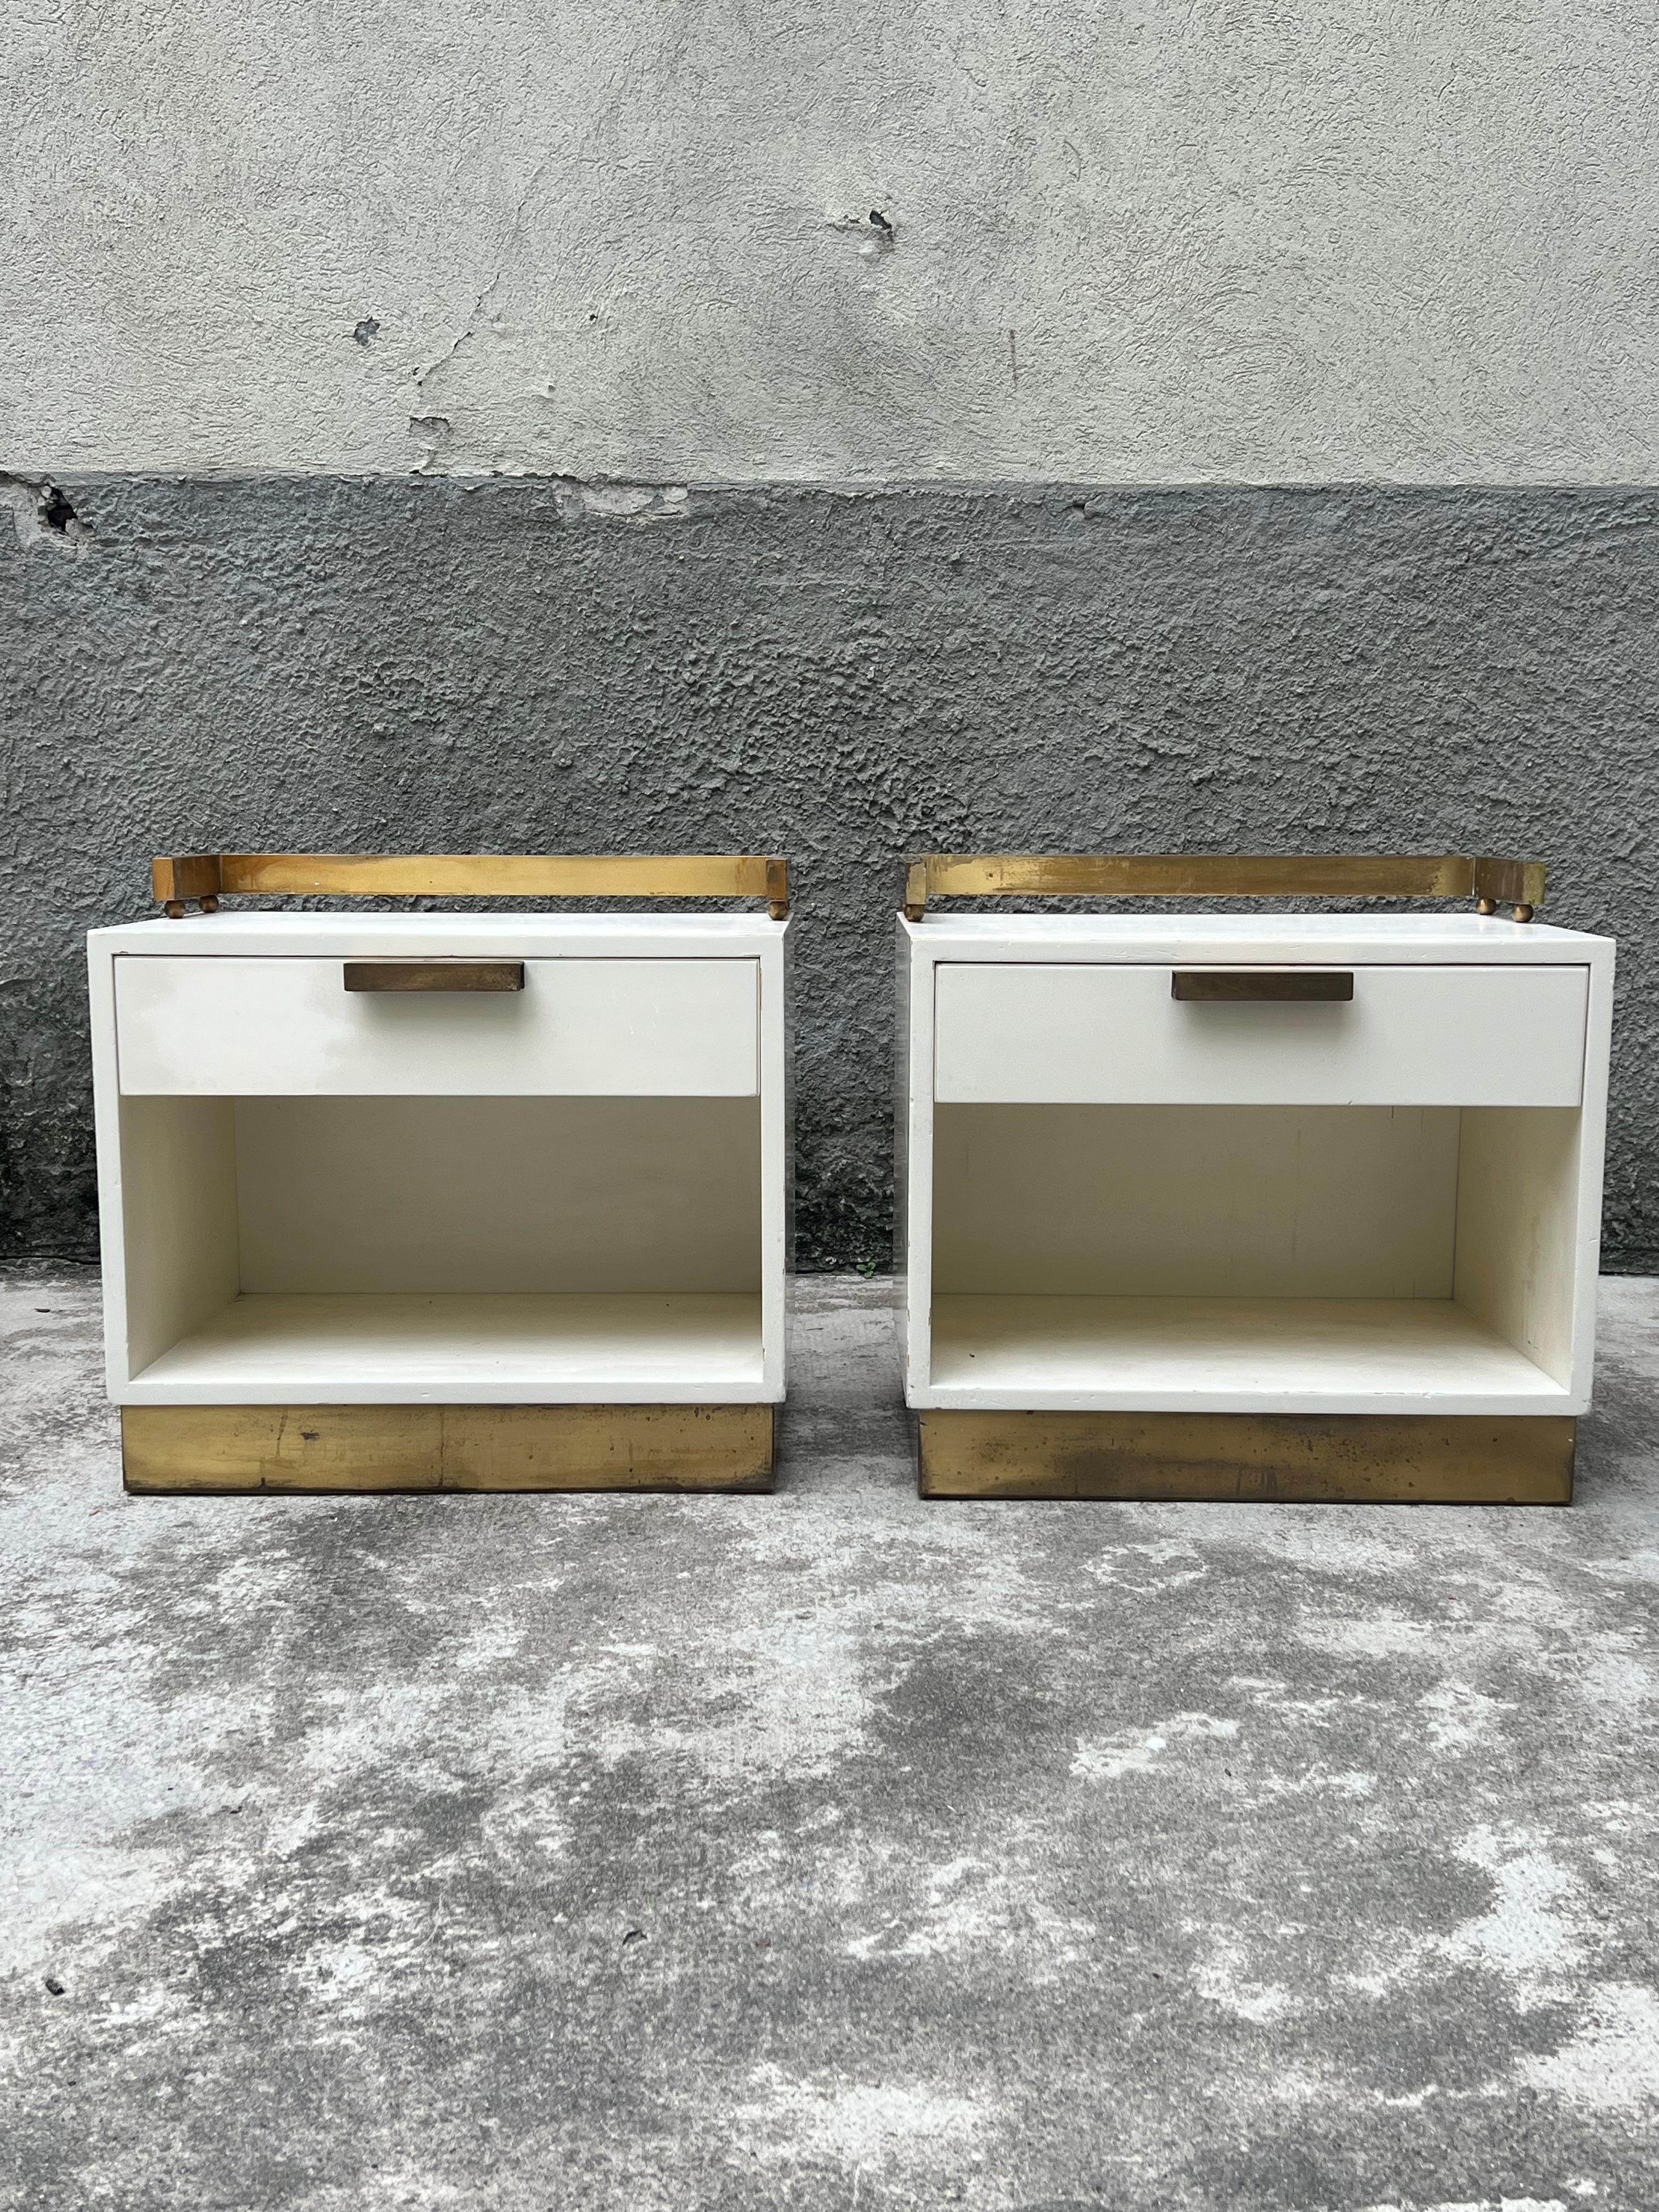 Elegant pair of bedside tables in ivory lacquered wood, enhanced by brass details such as a beading to cover the perimeter band of the base, a convenient, solid handle in the center of the drawers, and a functional balustrade that rests on spheres,